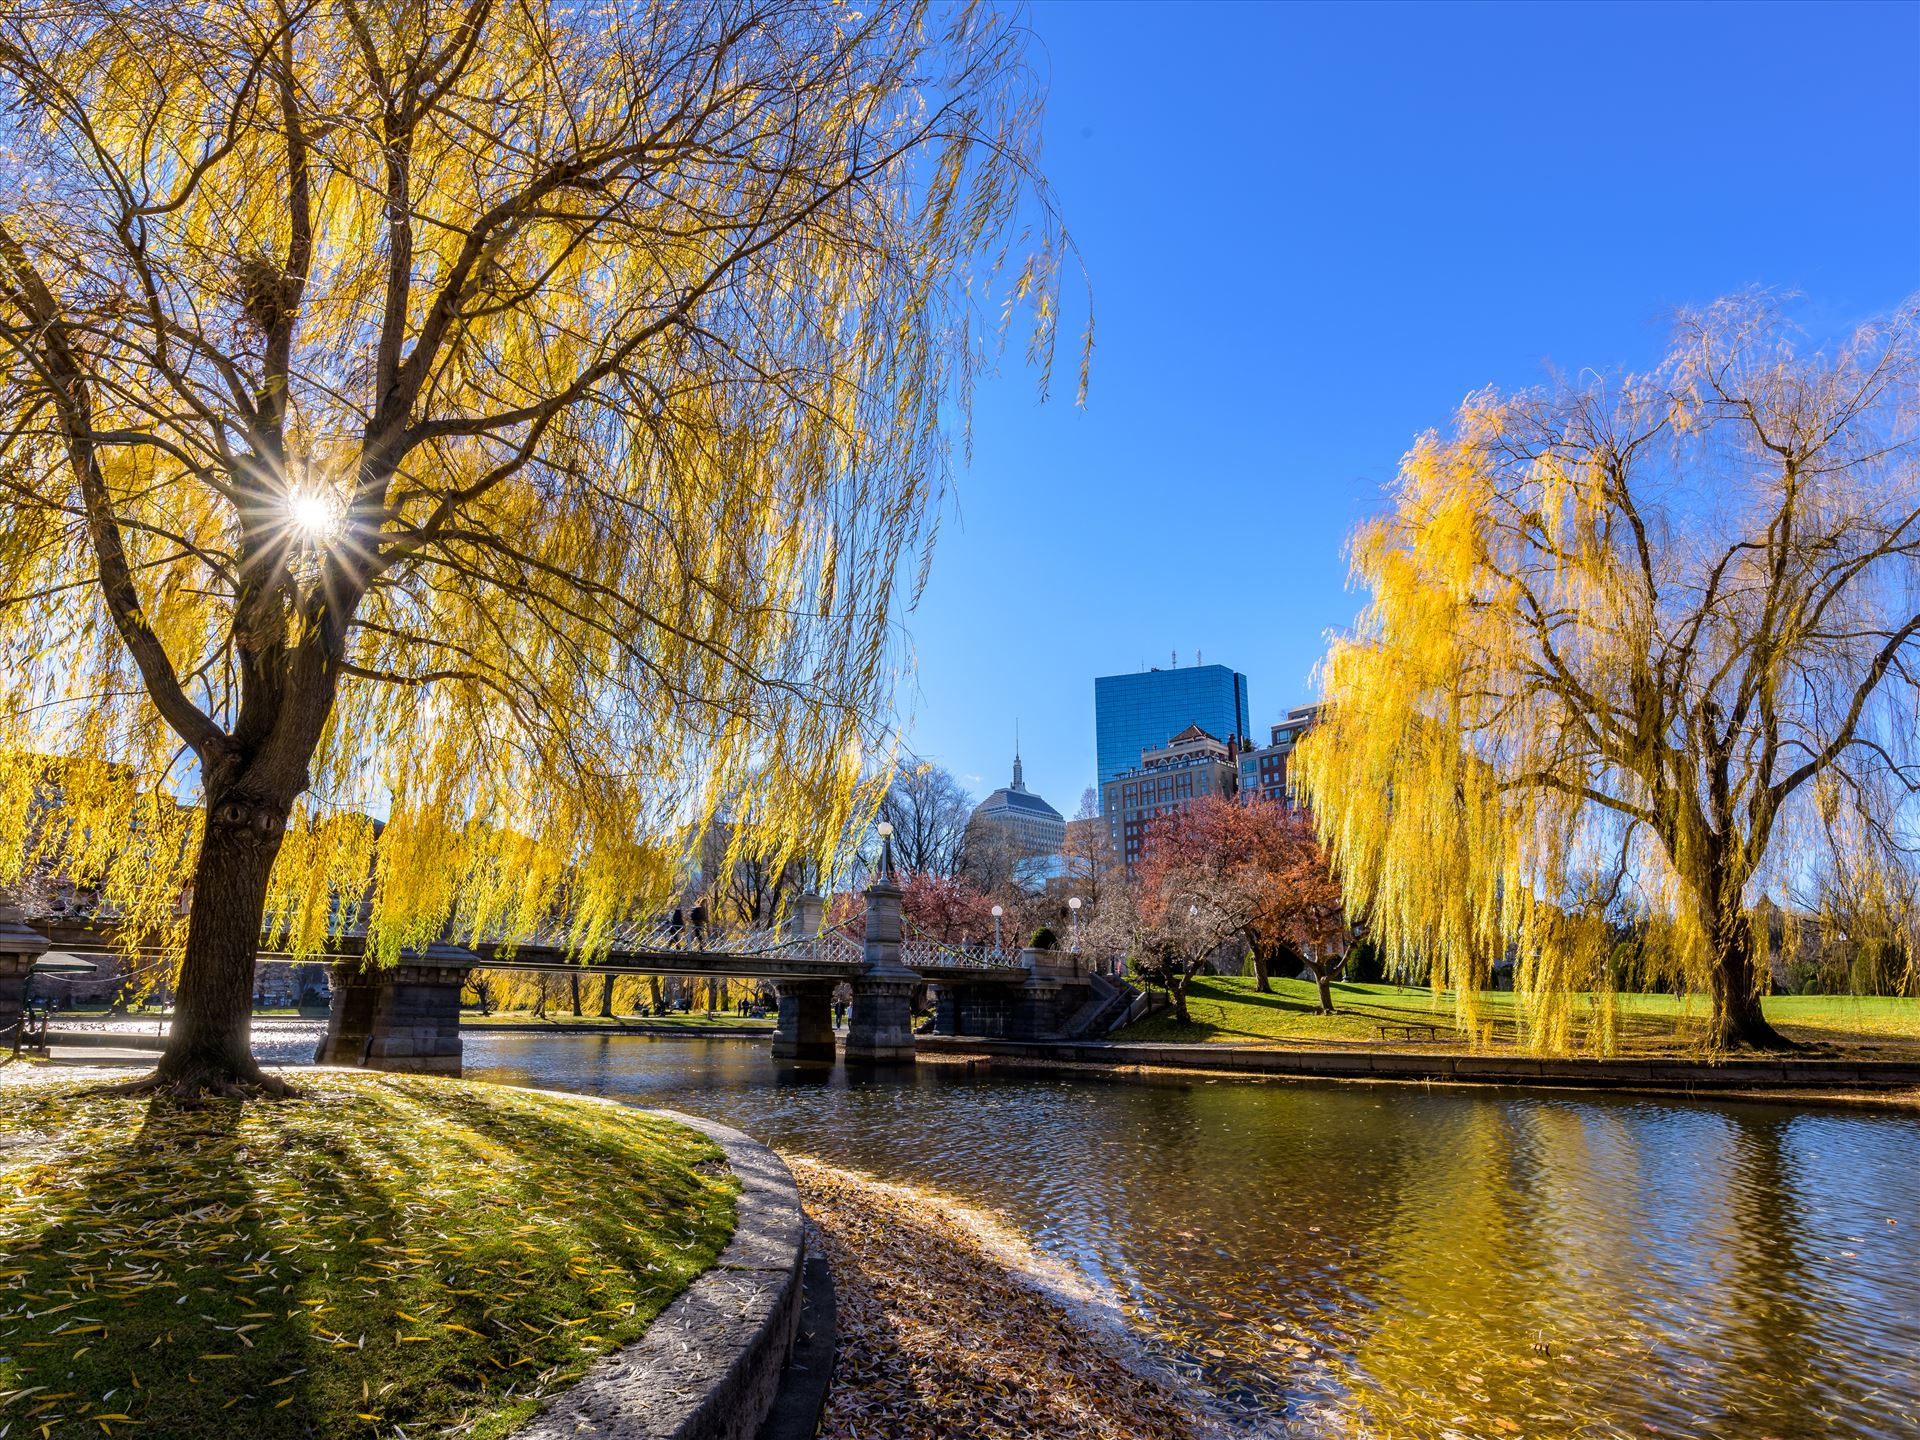 Trees show their vibrant fall color in the famous Boston Public Garden in Boston, Massachusetts -  by New England Photography